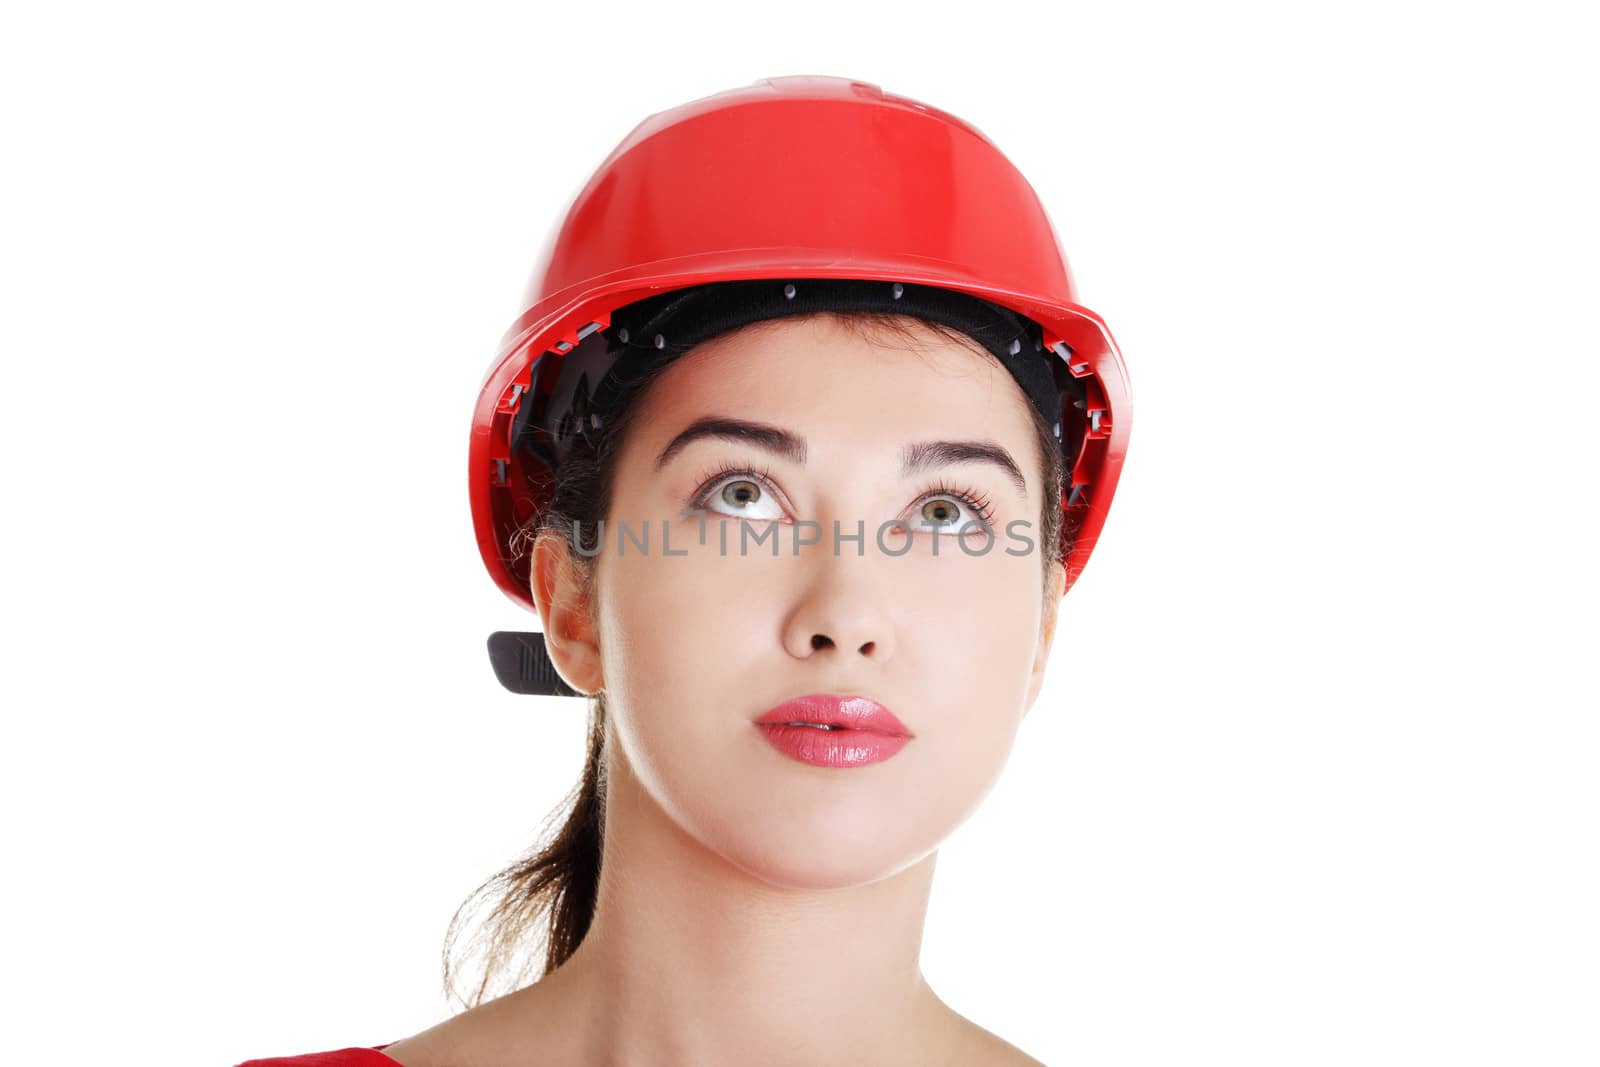 Portrait of confident female worker in helmet looking up. Isolated on white